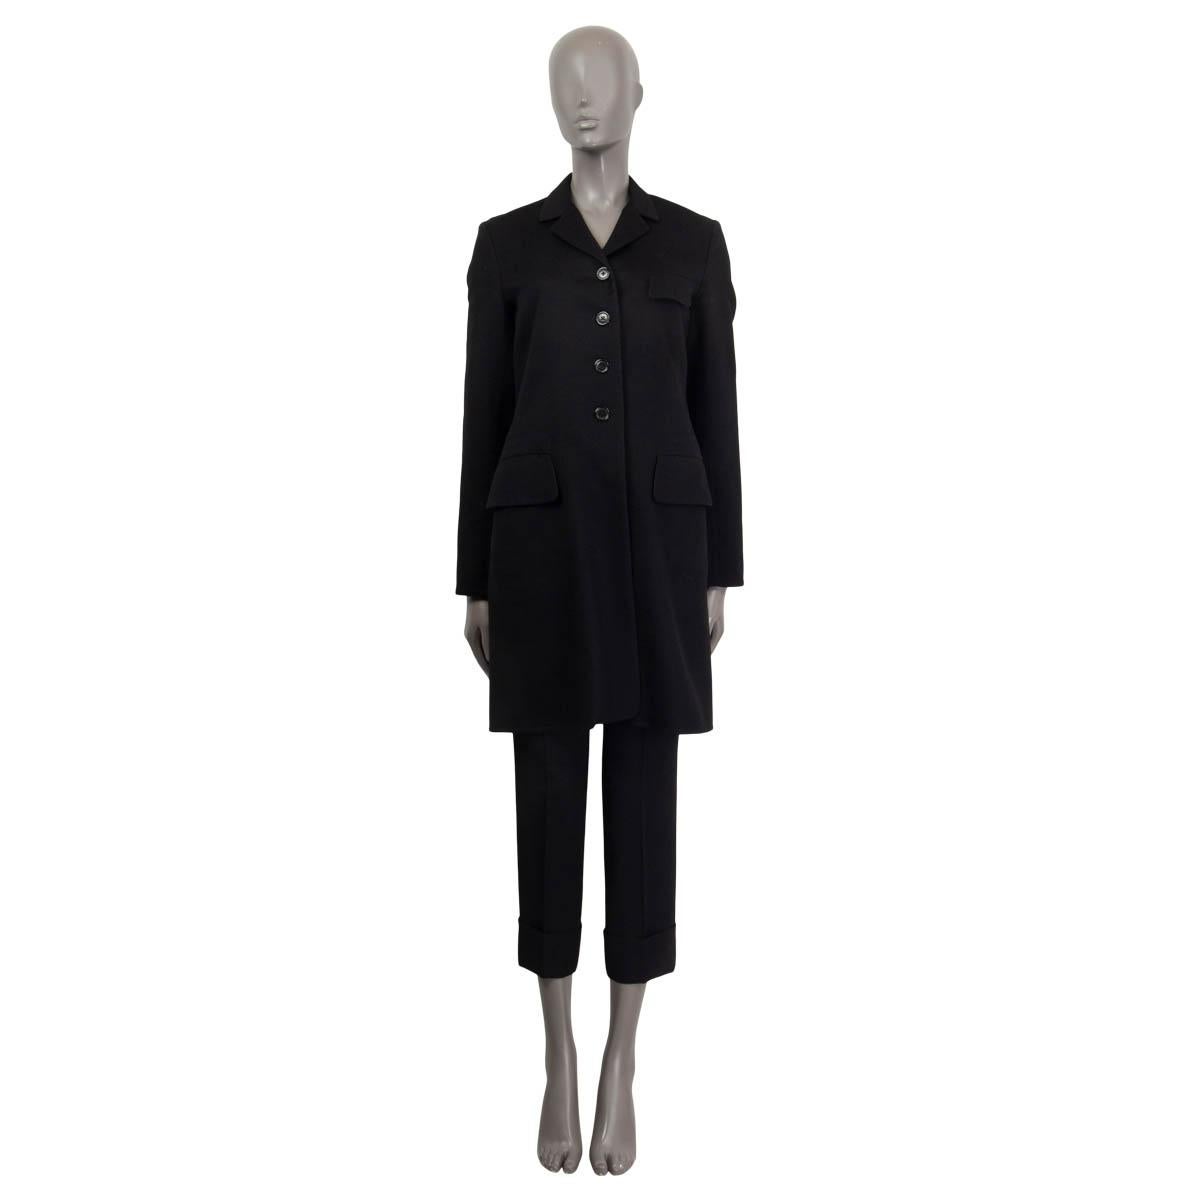 100% authentic Jil Sander single-breasted between seasons coat in black cashmere (100%). Features three flap pockets on the front and a slit on the back. Has a detachable black vest in black polyamide (100%). Opens with four buttons on the front.